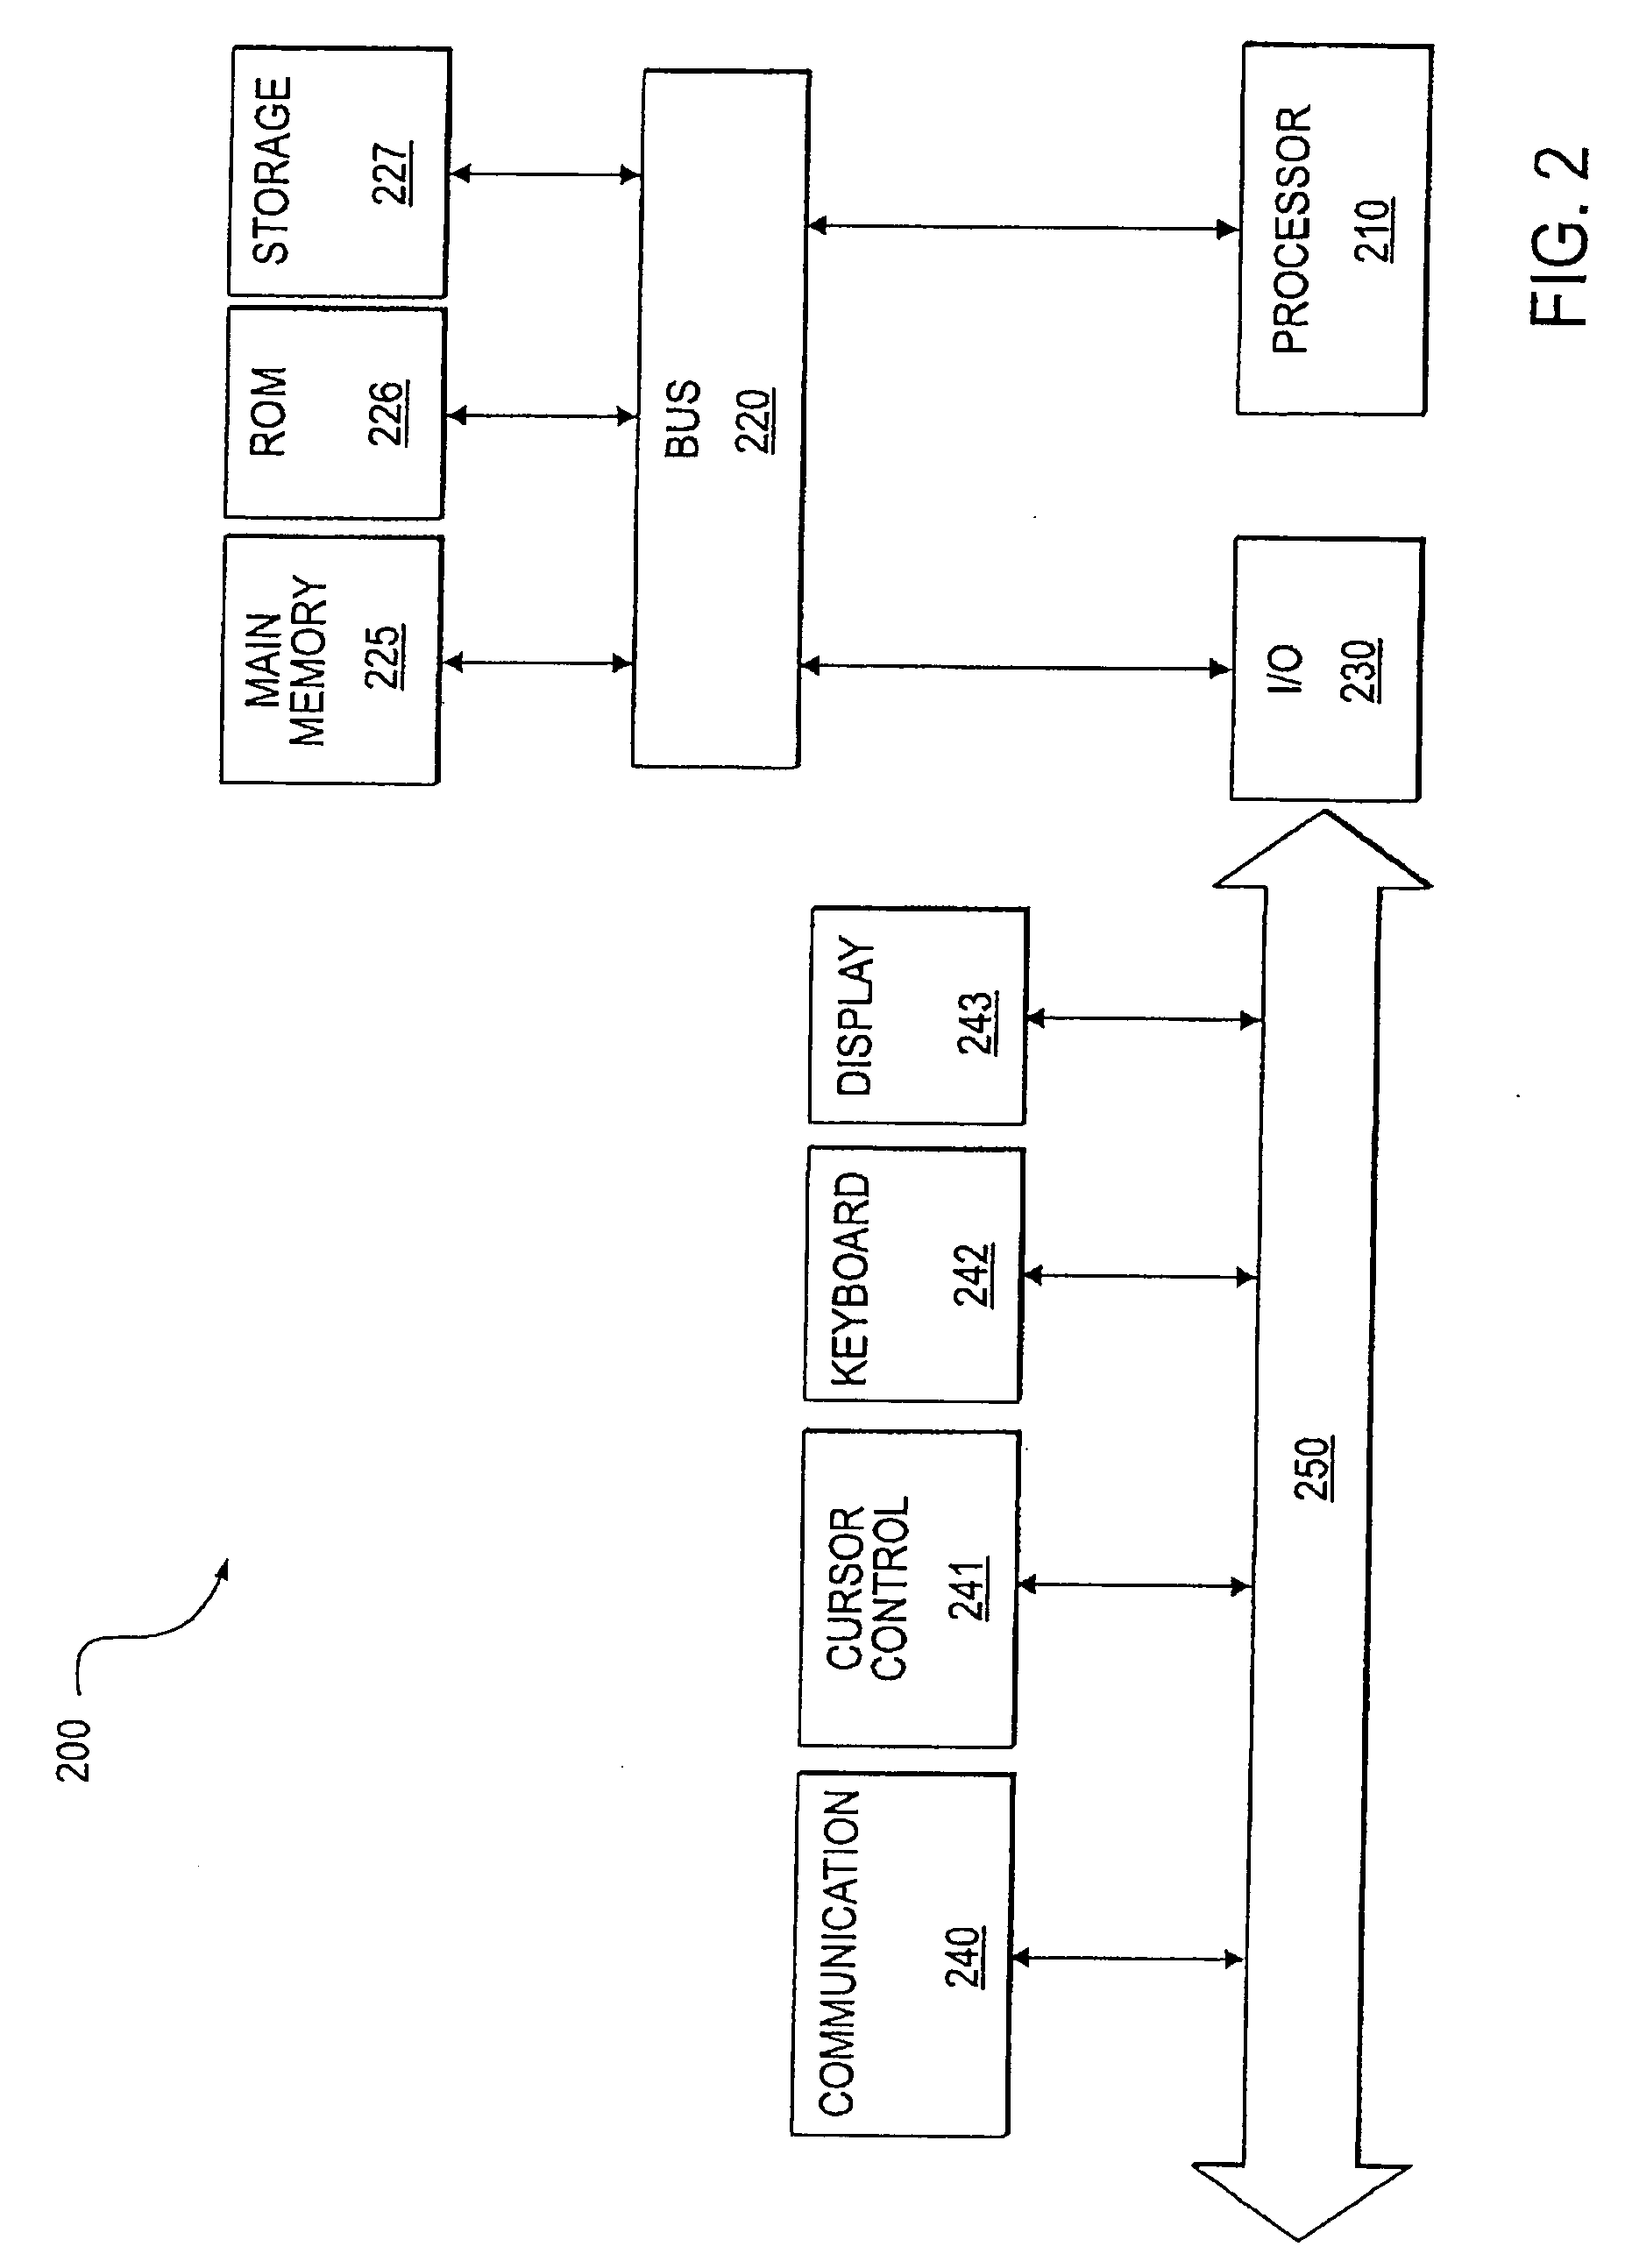 Method and system for providing a routing protcol for wireless networks